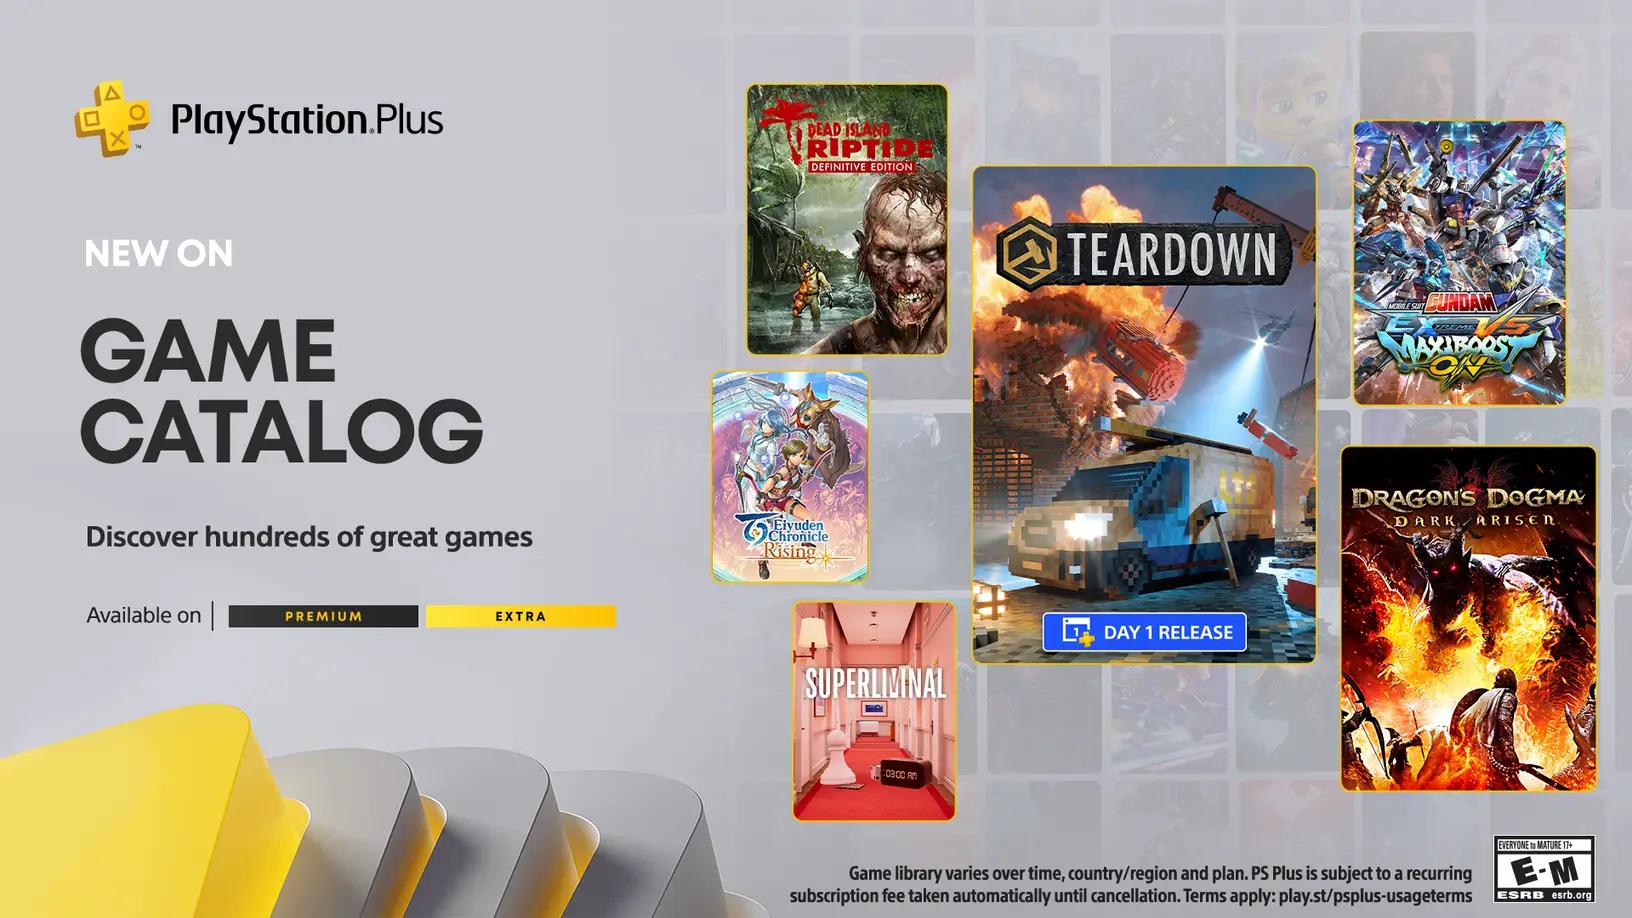 Sony has confirmed even more PlayStation Black Friday deals will start this  week, including a brand new discount on PS Plus memberships.…